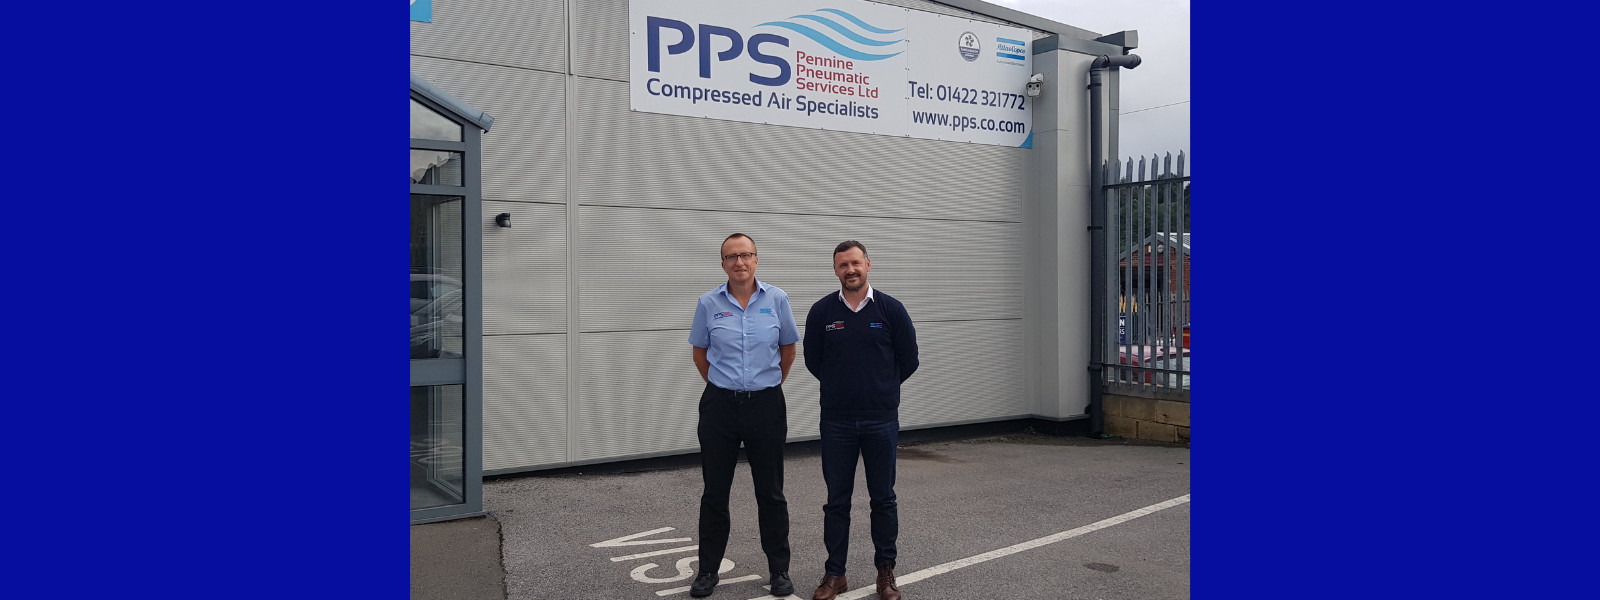 Pennine Pneumatic Services Ltd appoints new Managing Director